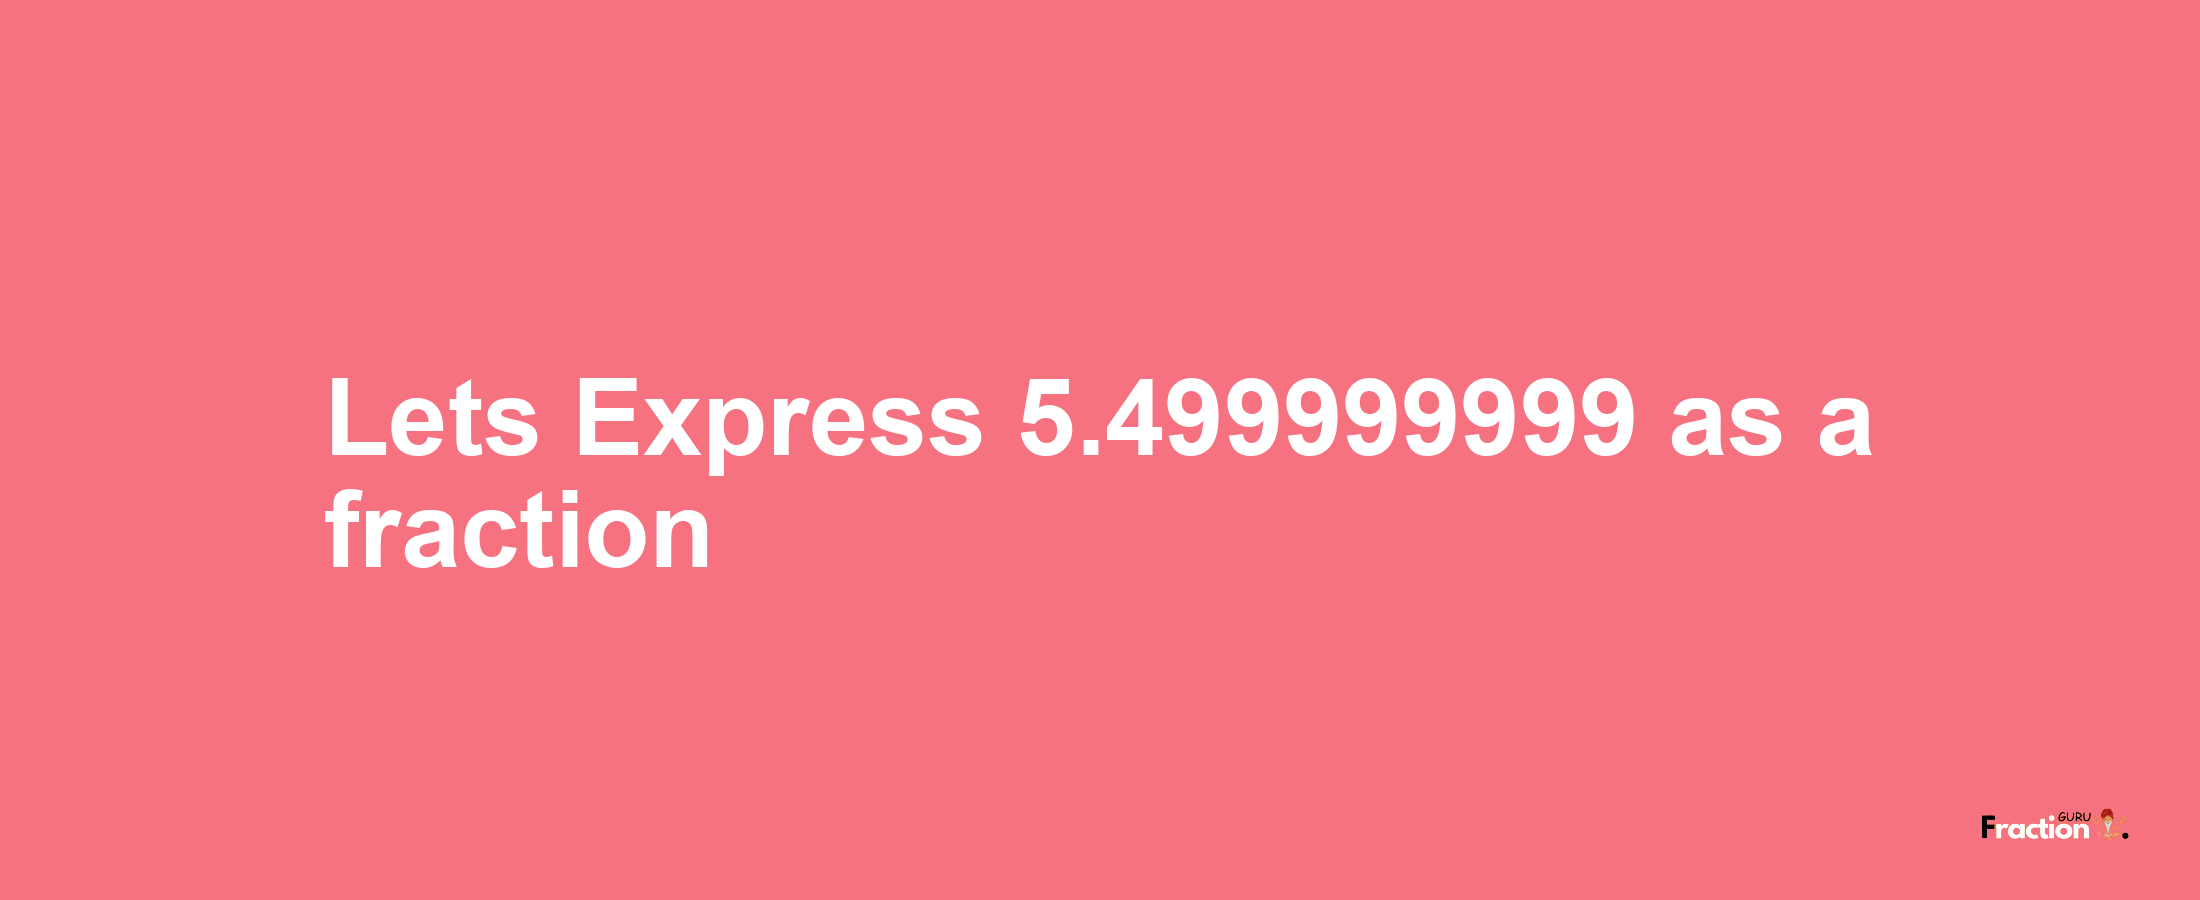 Lets Express 5.499999999 as afraction